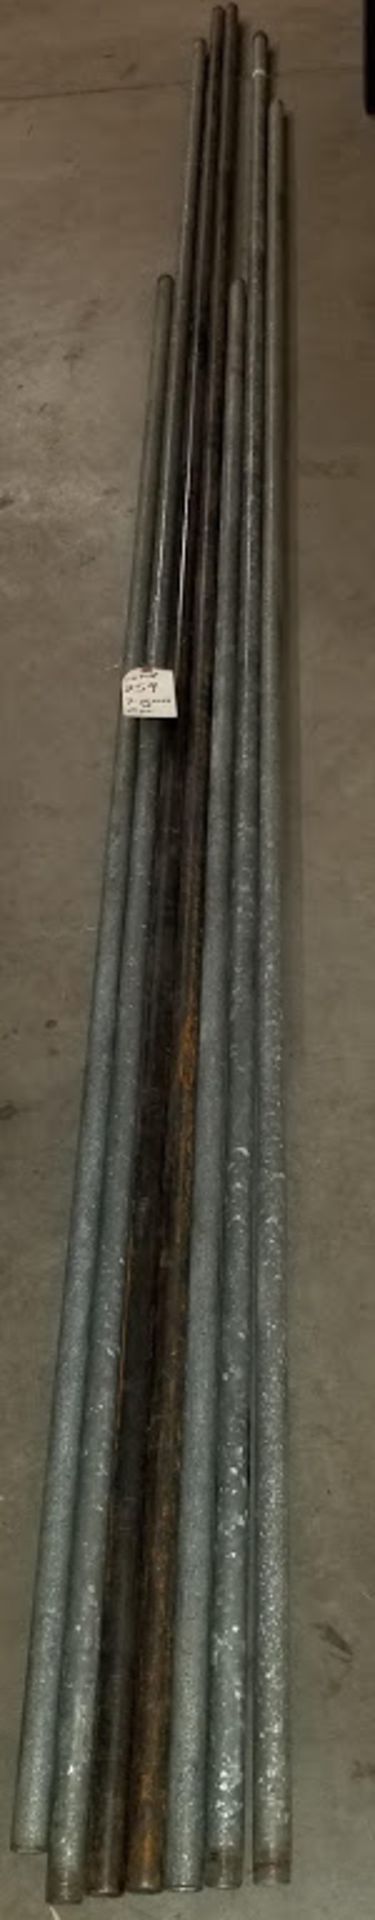 3/4" Pipe 7-10' Lengths (Qty 7) - Image 2 of 2